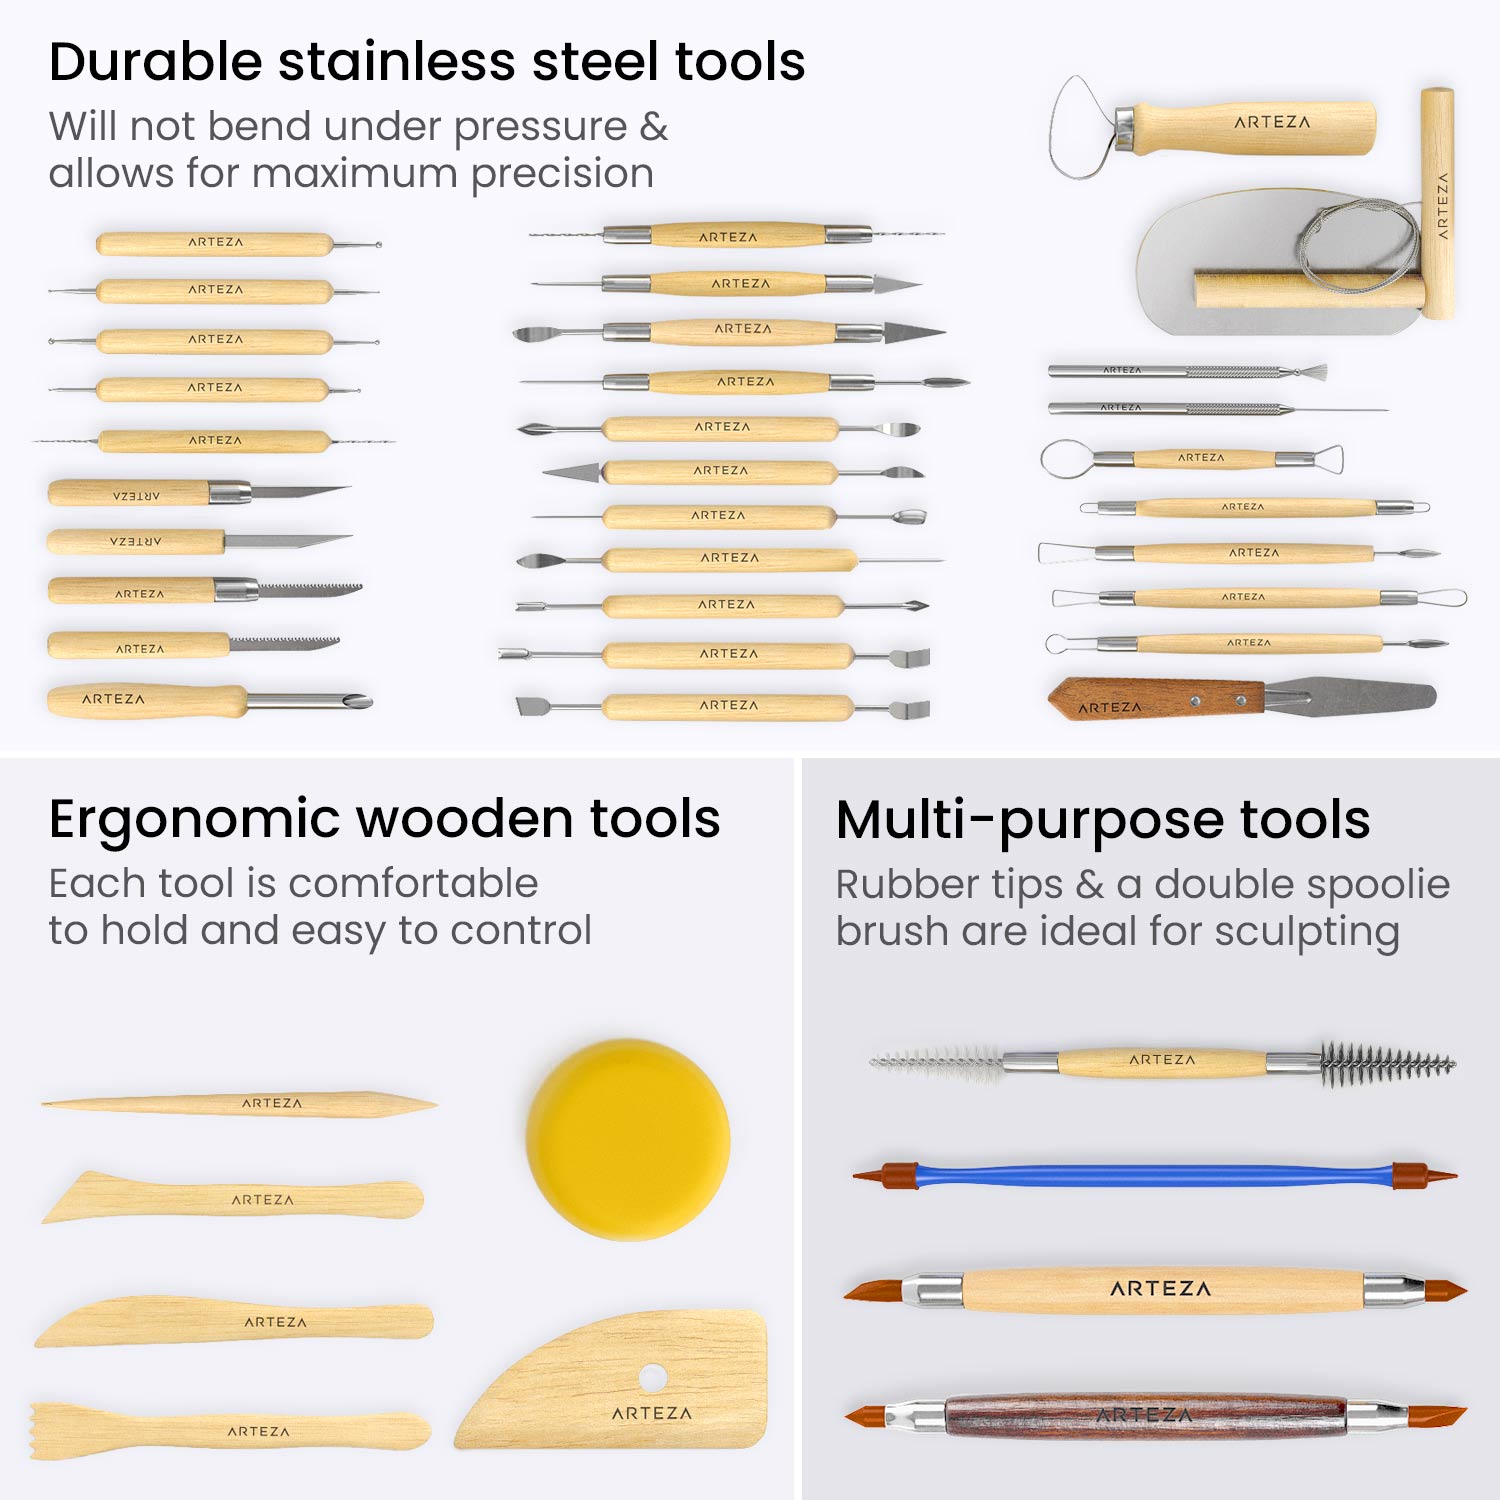 42-Piece Clay Tools and Pottery Tools Set for Sculpting and Ceramics – Mix  Wholesale